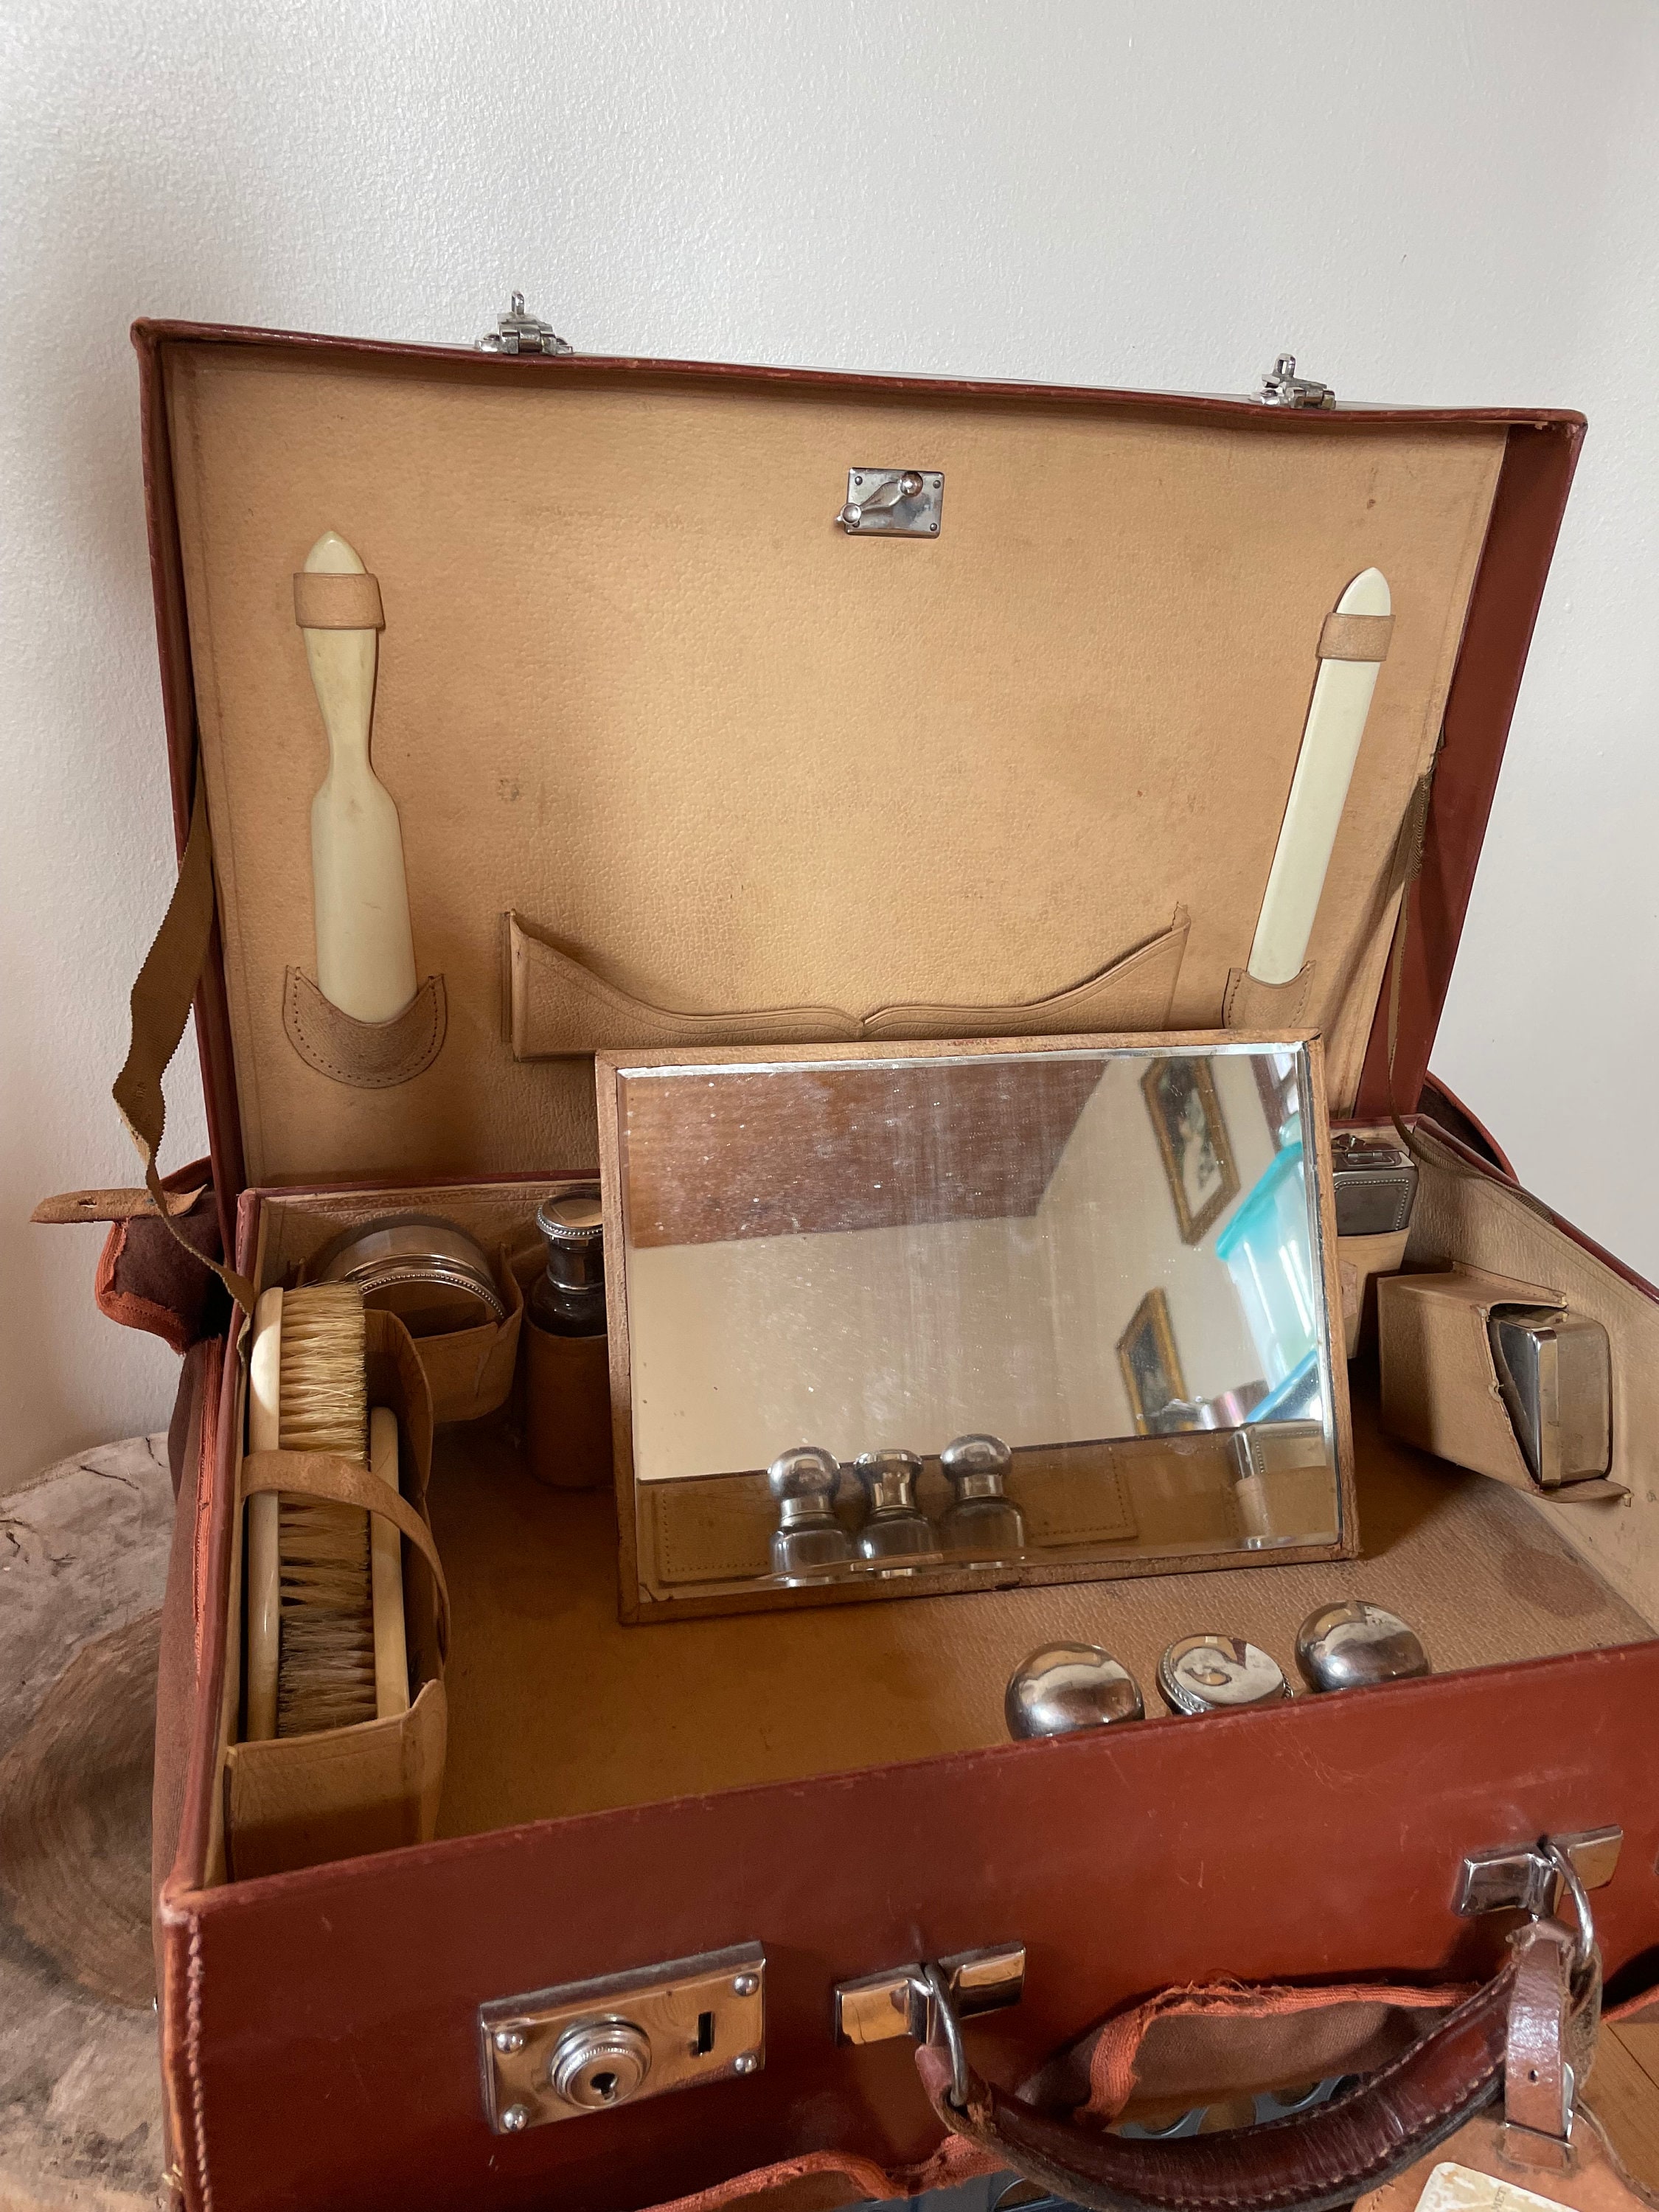 Antique French Ostrich Leather Folding Vanity Case with 15 Implements, –  Antiques & Uncommon Treasure